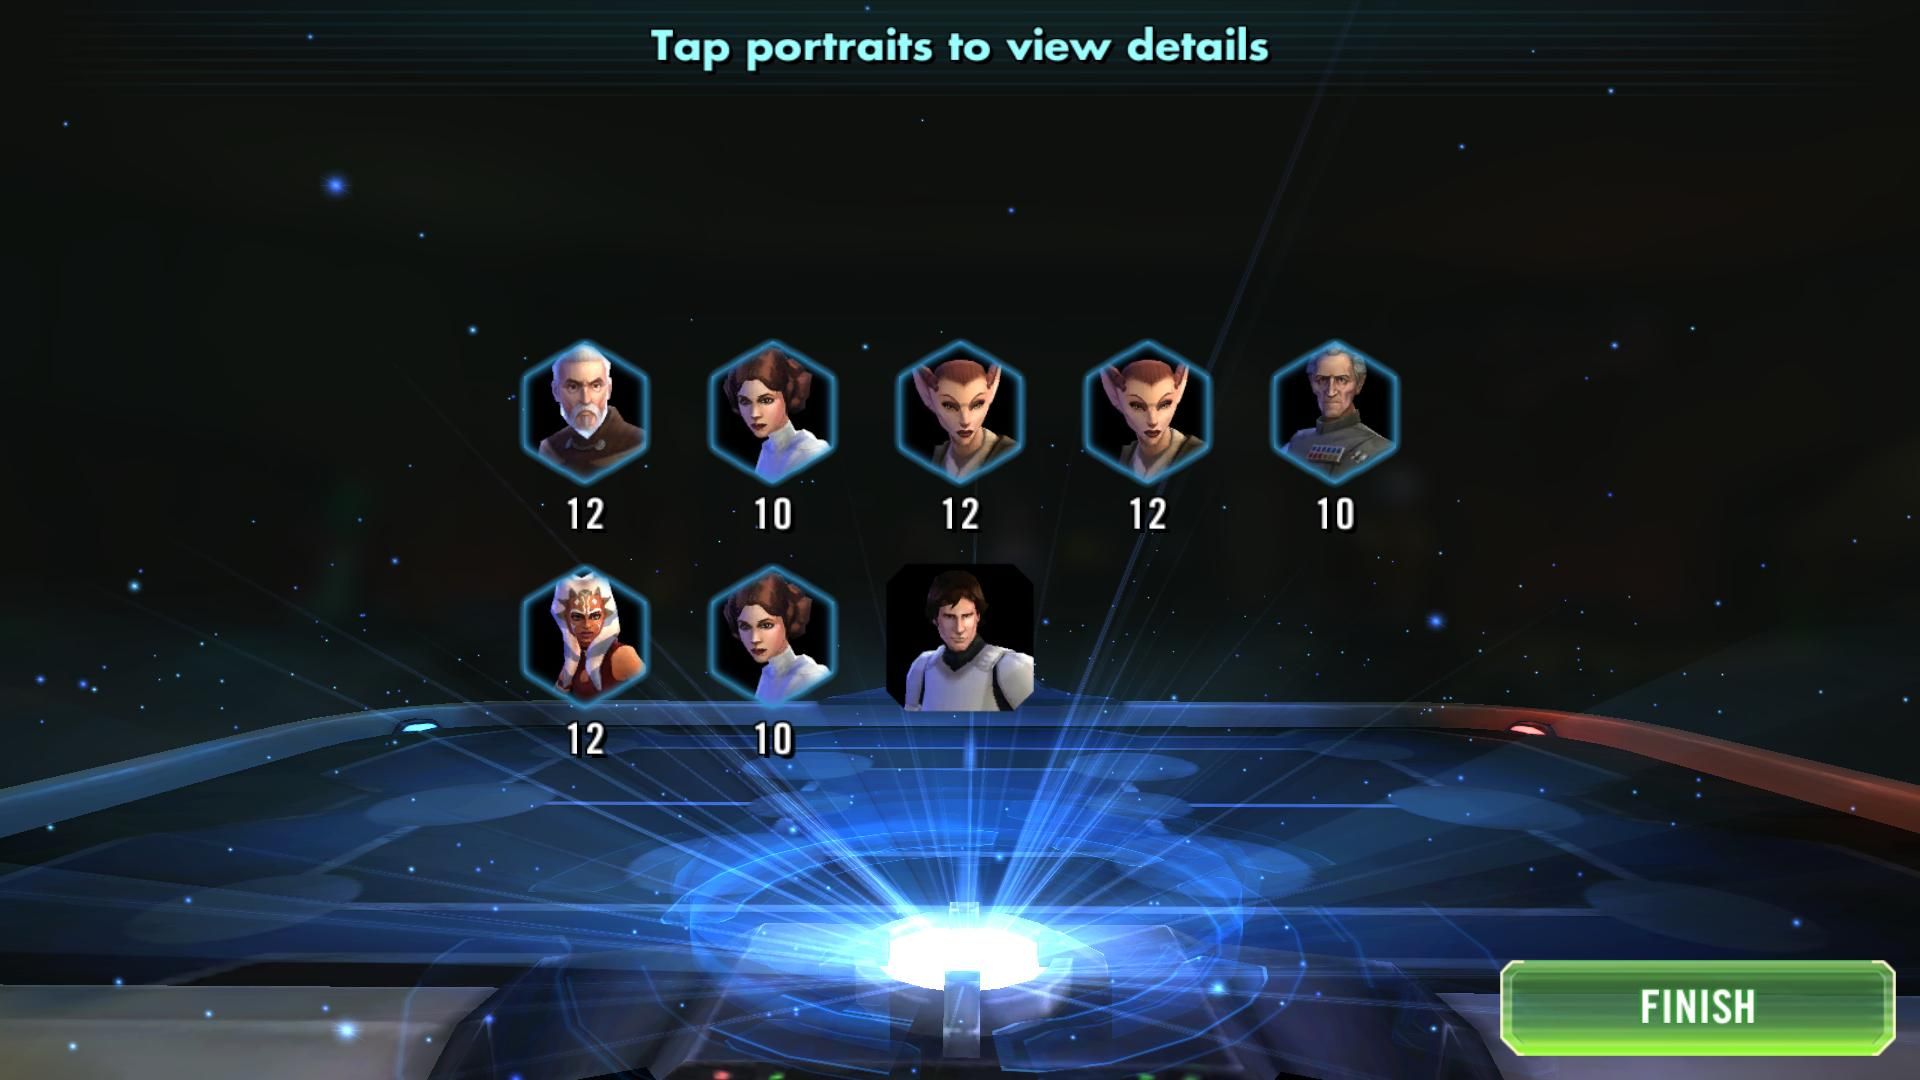 30 Hidden Things Players Can Do In Star Wars Galaxy Of Heroes